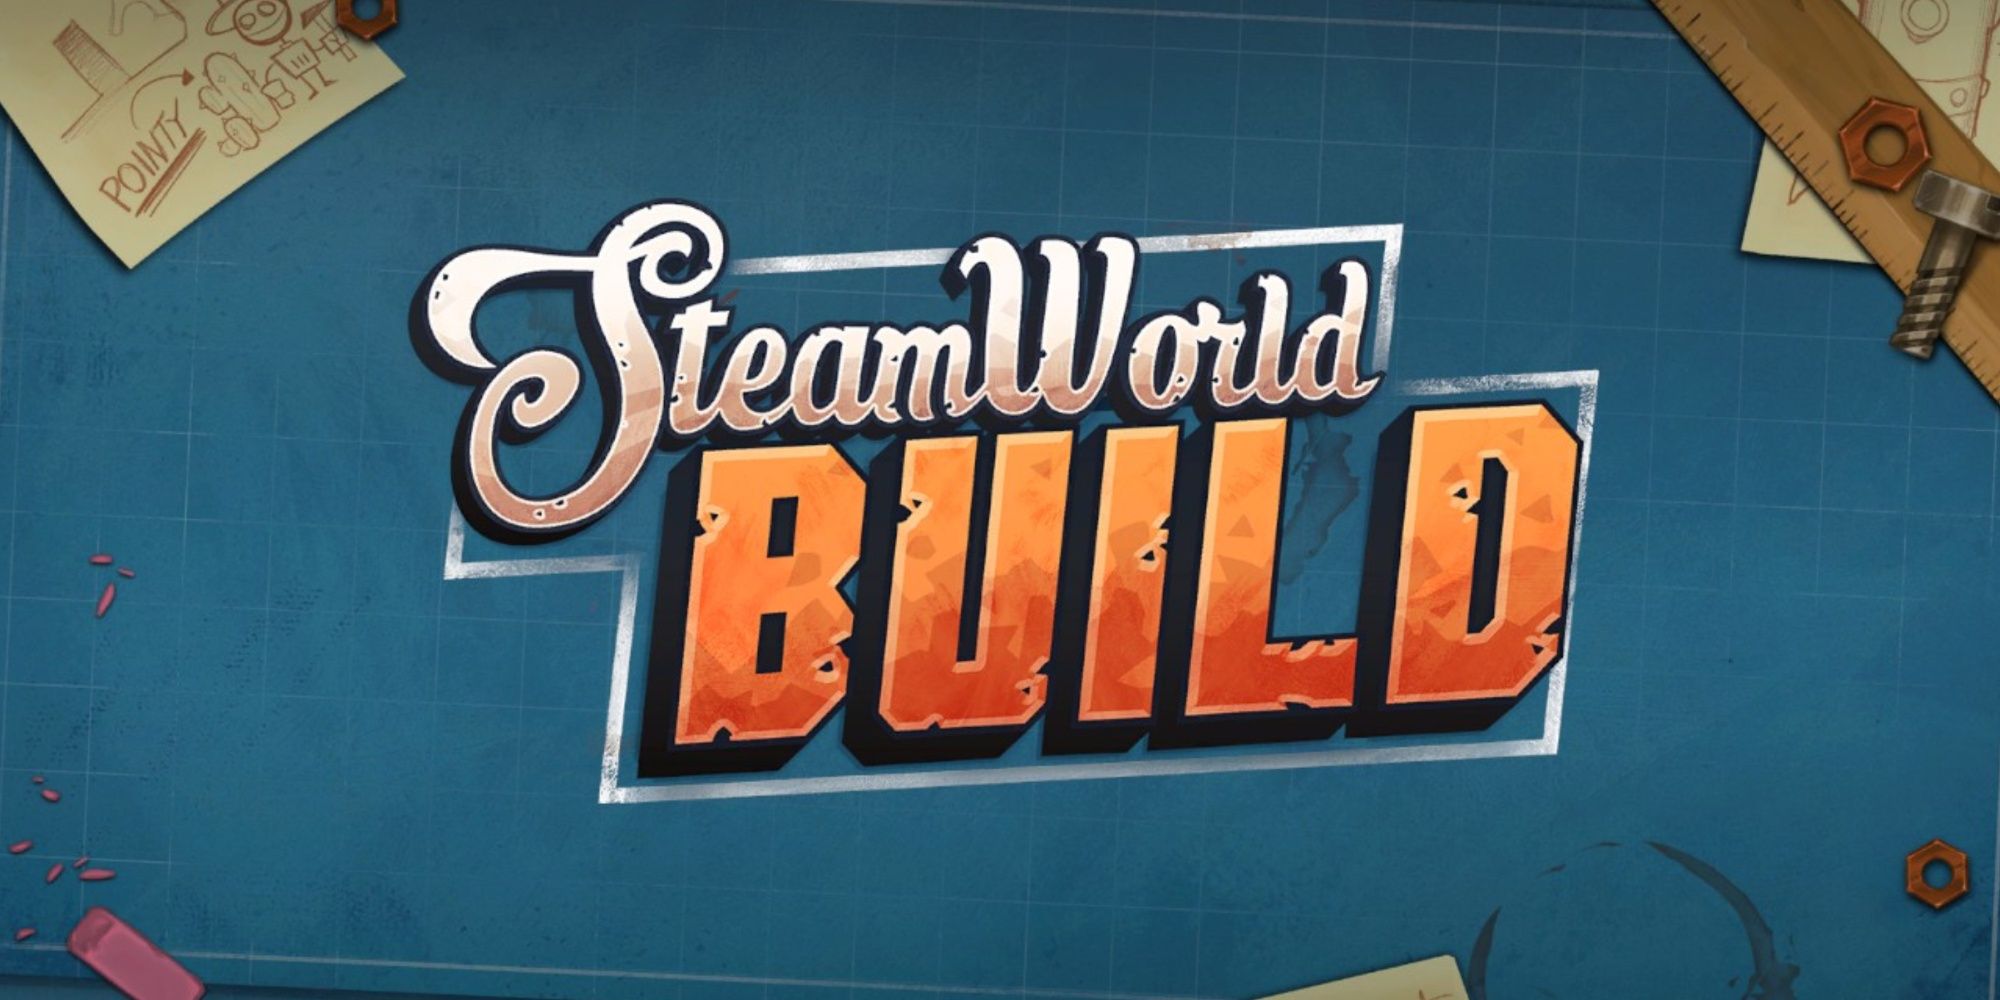 Drawn title artwork from the credits with white and orange text on a blue background, bolts and a ruler, and a pencil drawing of a Steambot from Steamworld Build.